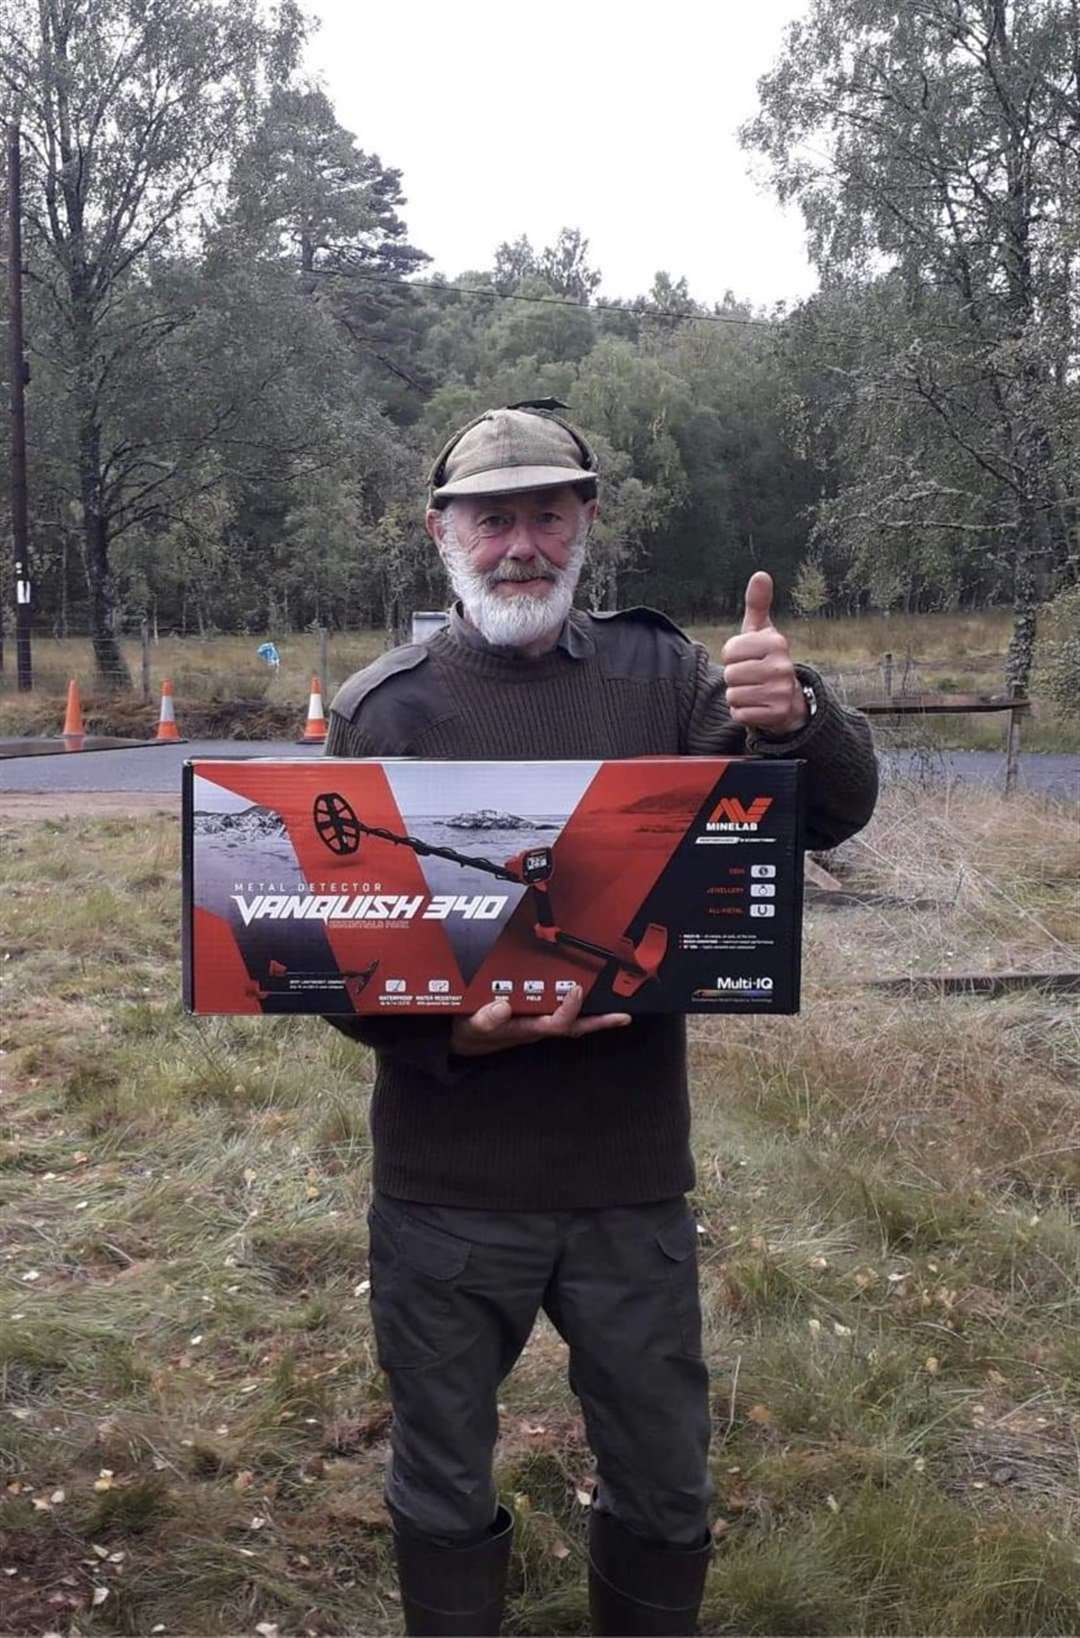 Lucky number's winner Dennis Ross with his prize, a Vanquish 340 metal detector.